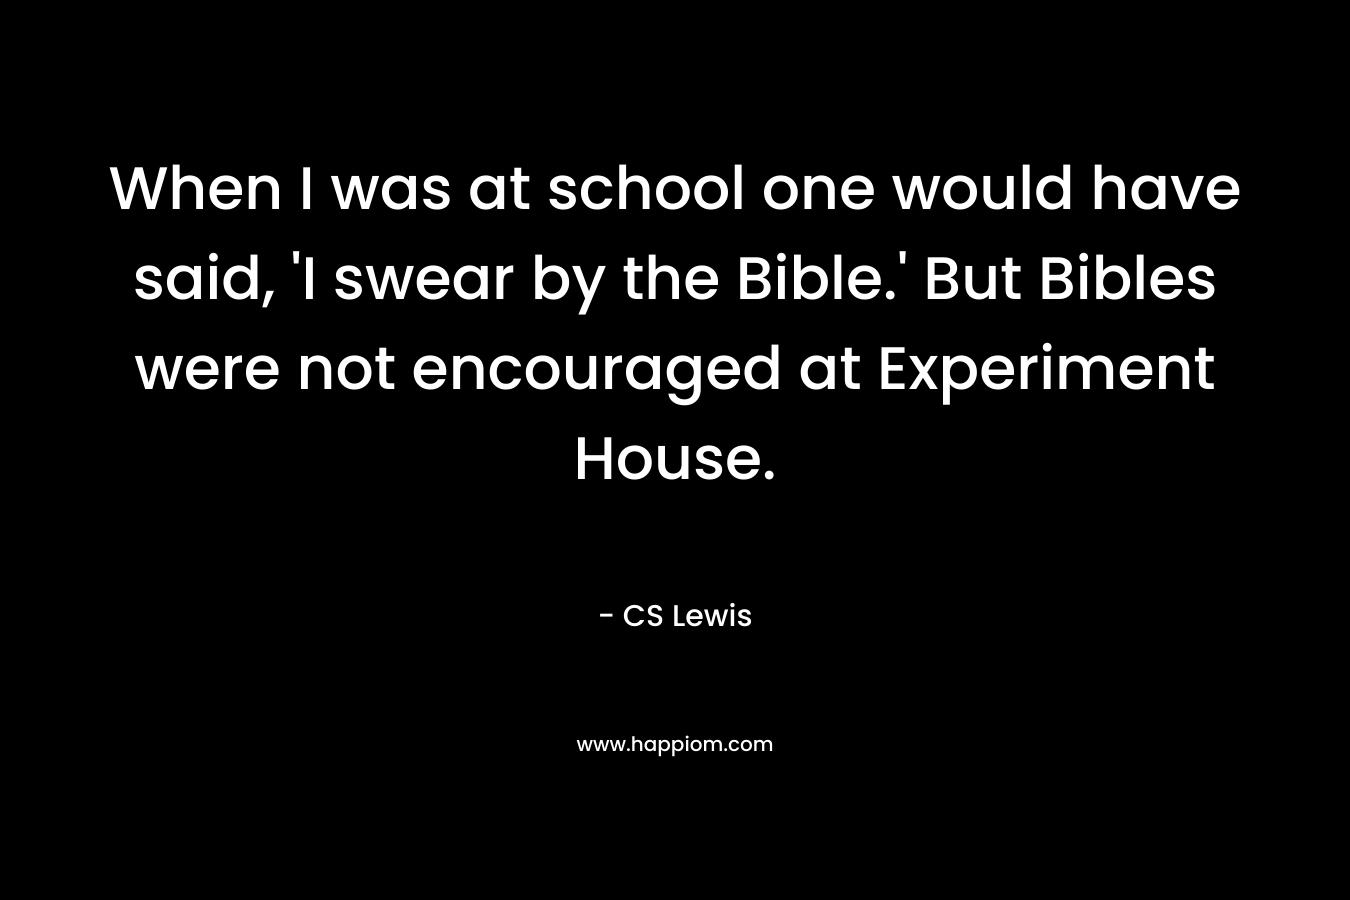 When I was at school one would have said, ‘I swear by the Bible.’ But Bibles were not encouraged at Experiment House. – CS Lewis